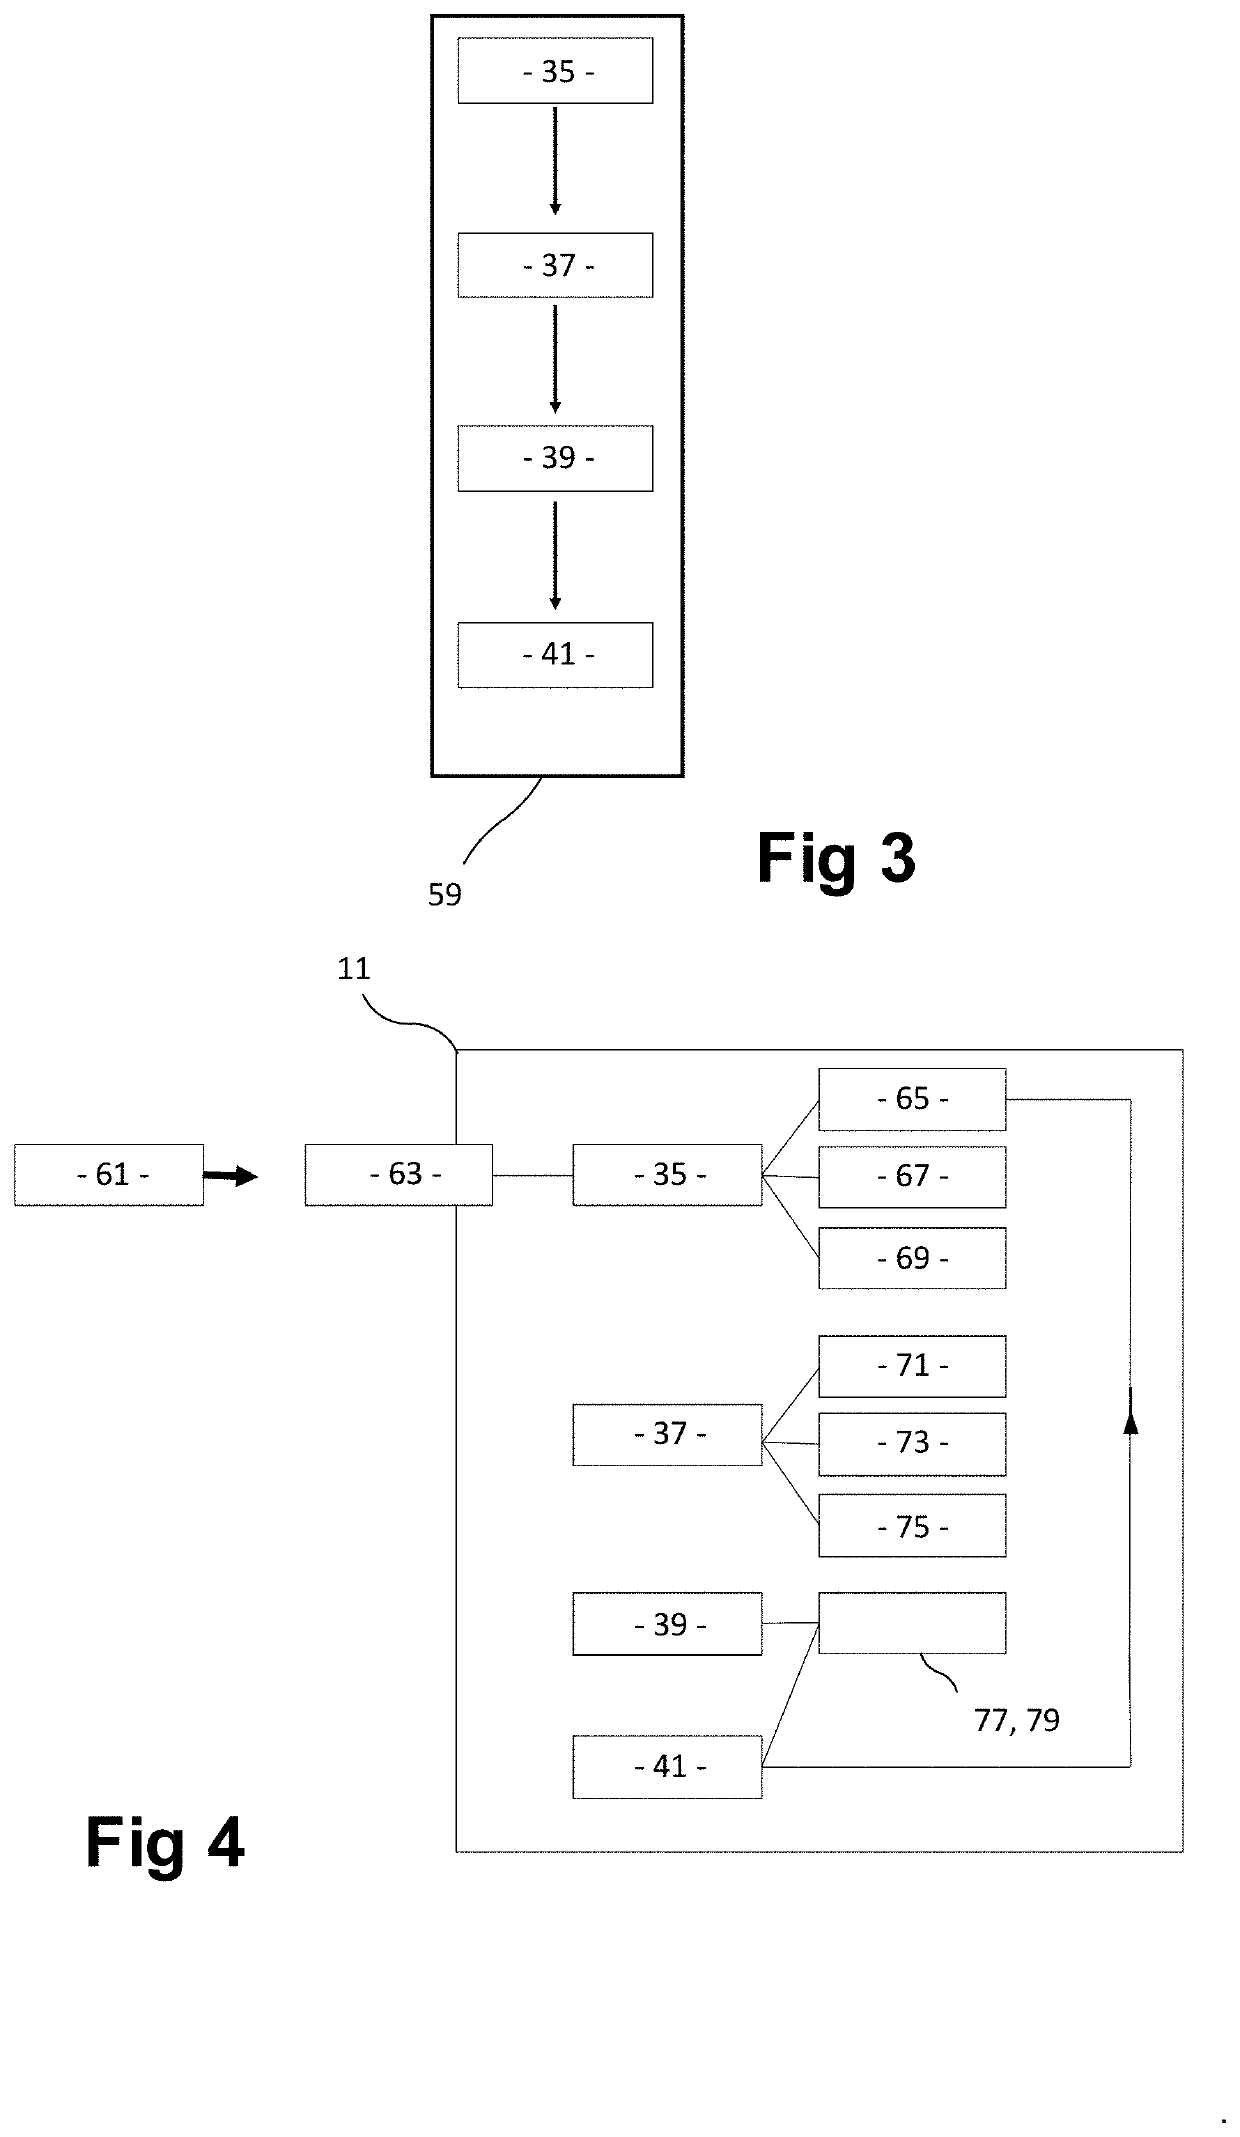 A method and system for generating a decision-making algorithm for an entity to achieve an objective